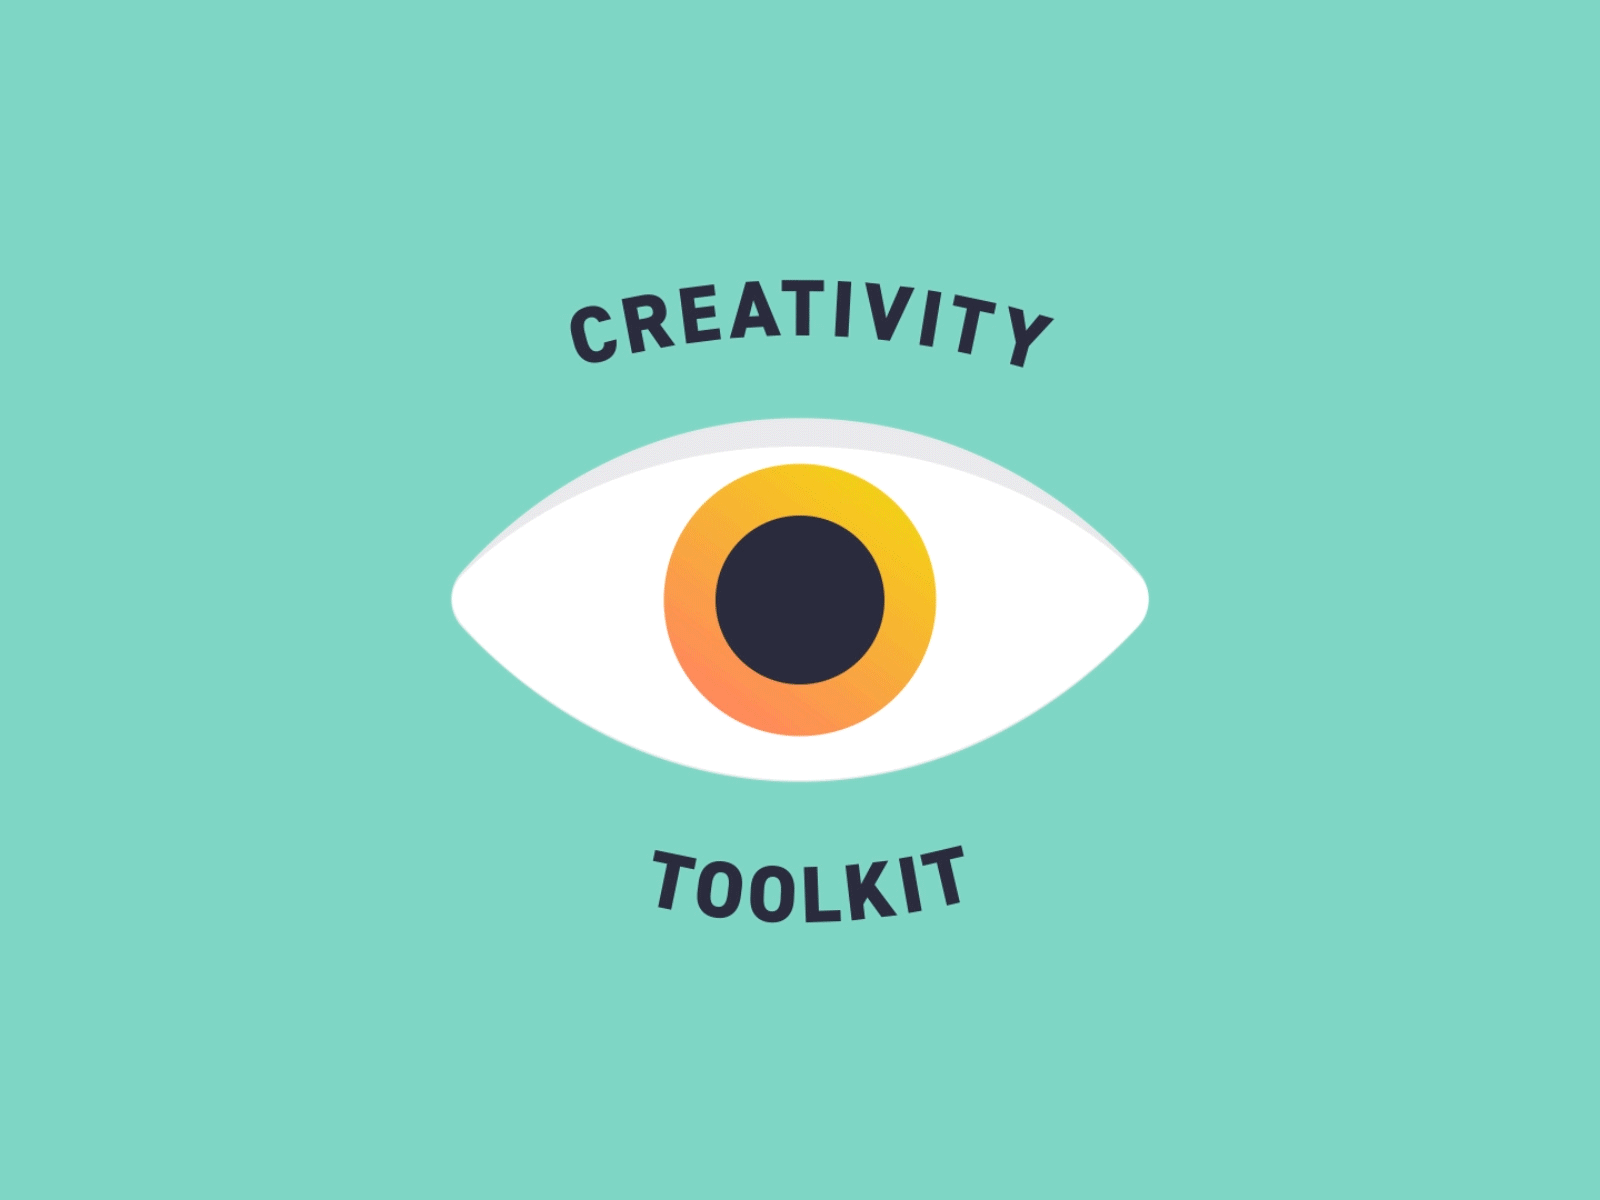 Creativity Toolkit Intro after effects animation animation after effects blink creativity design eye eye animation flat flatdesign intro loop animation minimal motion graphics text animation texture transition youtube channel